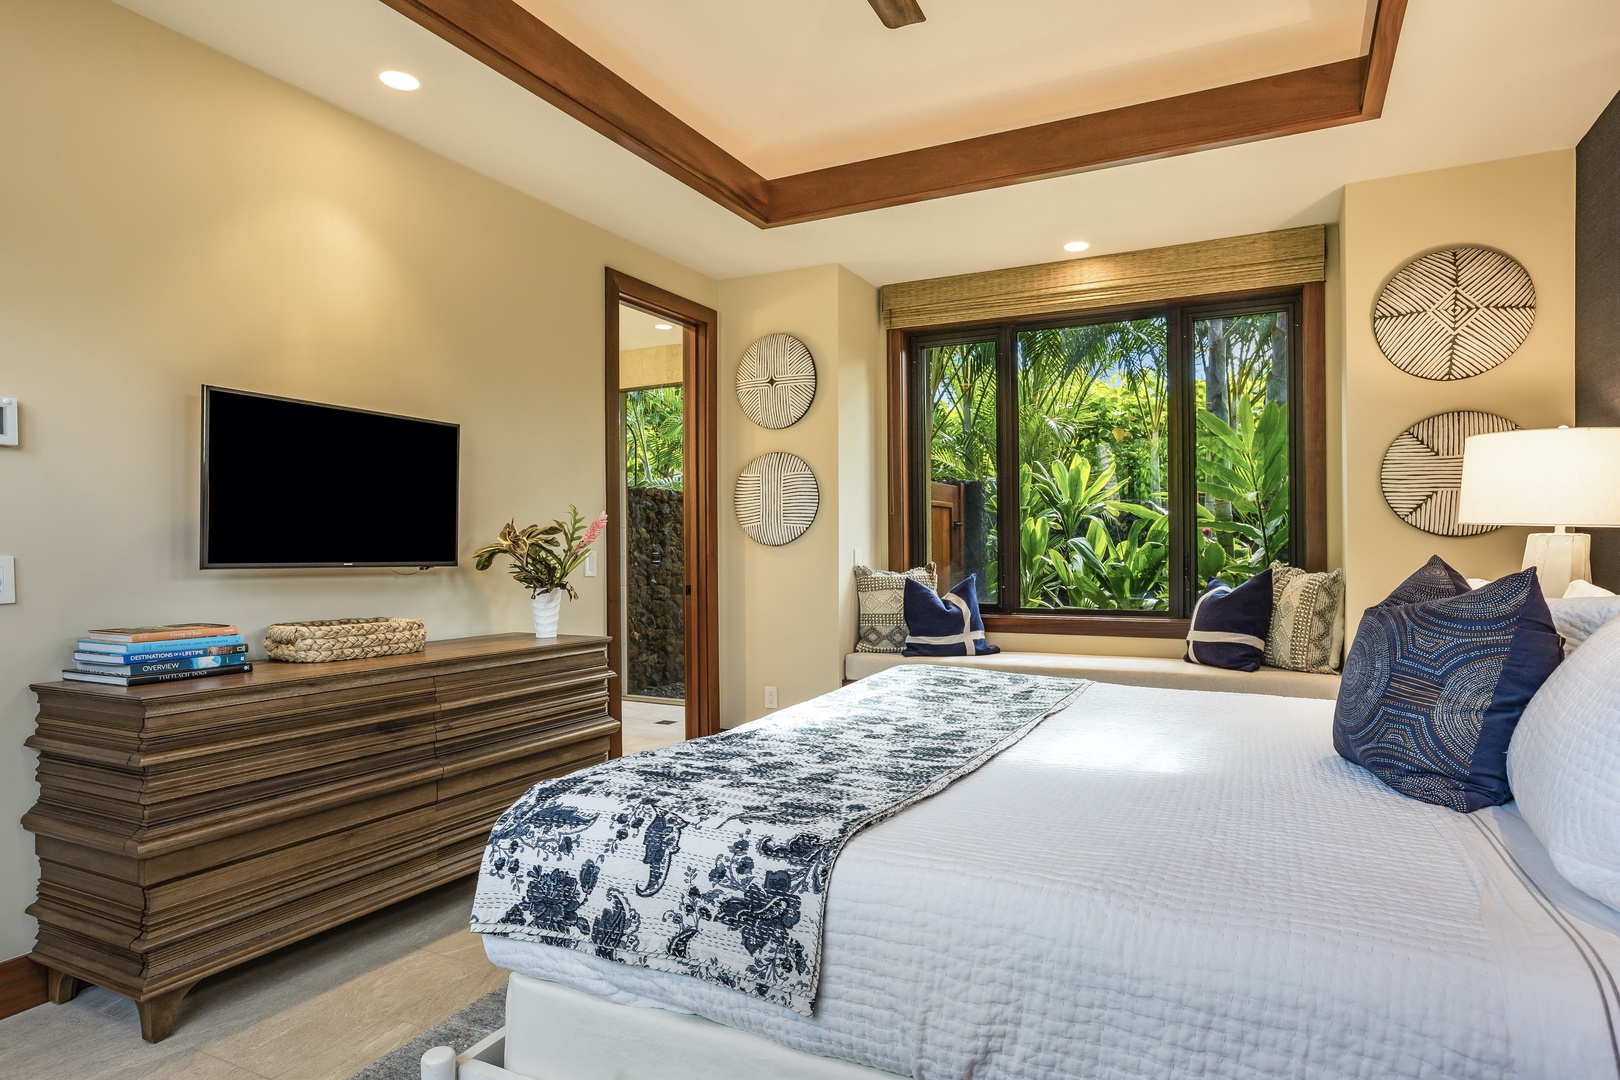 Kailua Kona Vacation Rentals, 4BD Kulanakauhale (3558) Estate Home at Four Seasons Resort at Hualalai - Reverse view of the third guest room showcasing king-sized bed and built in window seating.